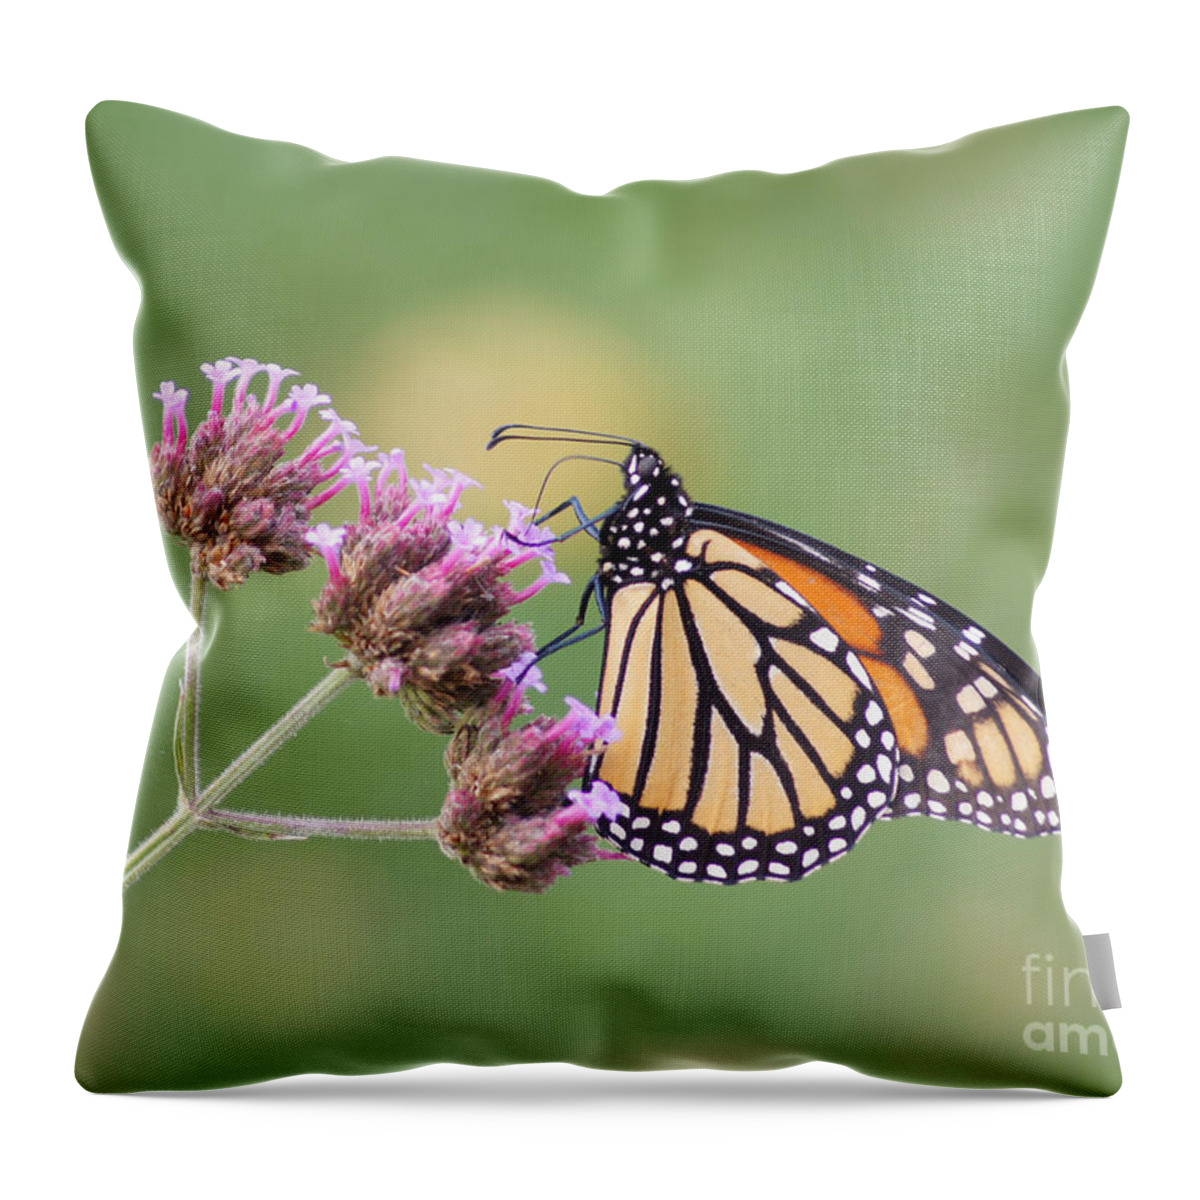 Monarch Throw Pillow featuring the photograph To Go Or Not To Go by Robert E Alter Reflections of Infinity LLC